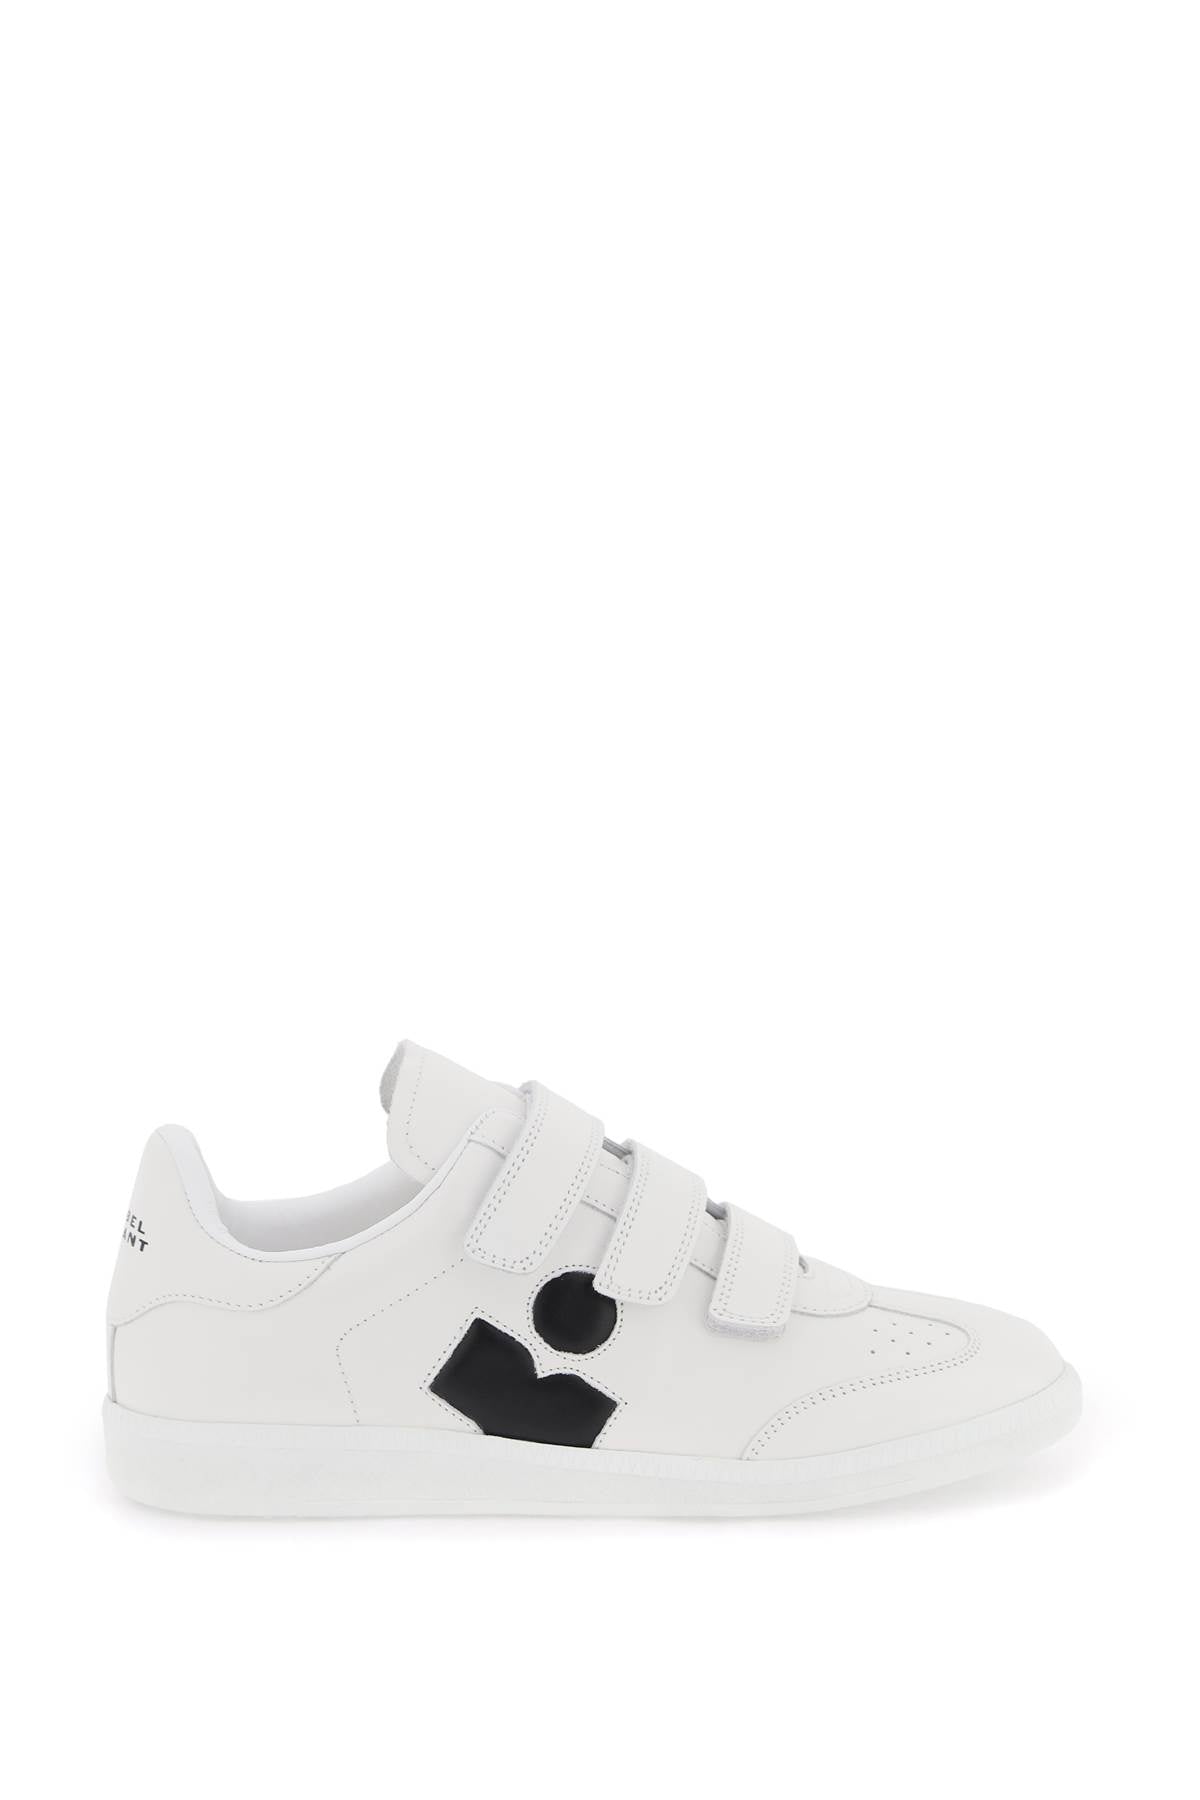 Isabel marant etoile beth leather sneakers-0